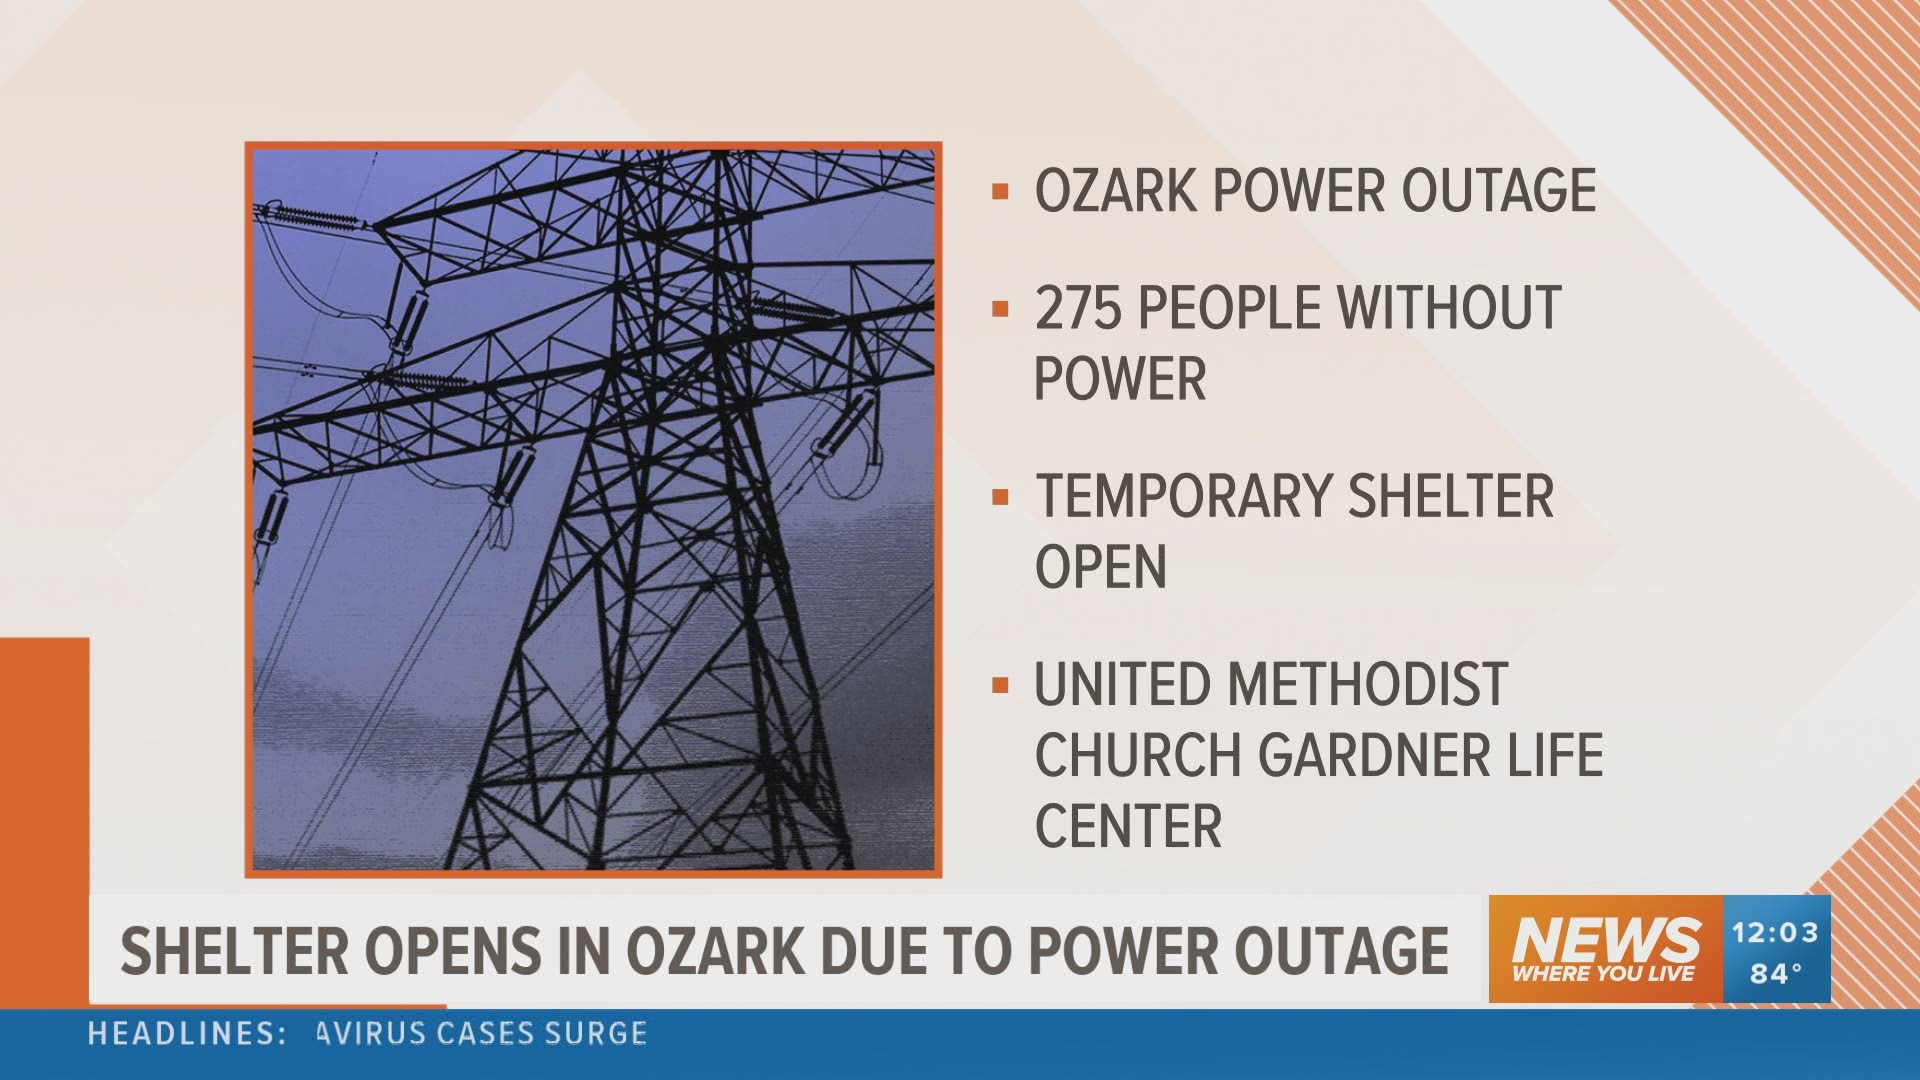 Shelter opens in Ozark due to power outage.